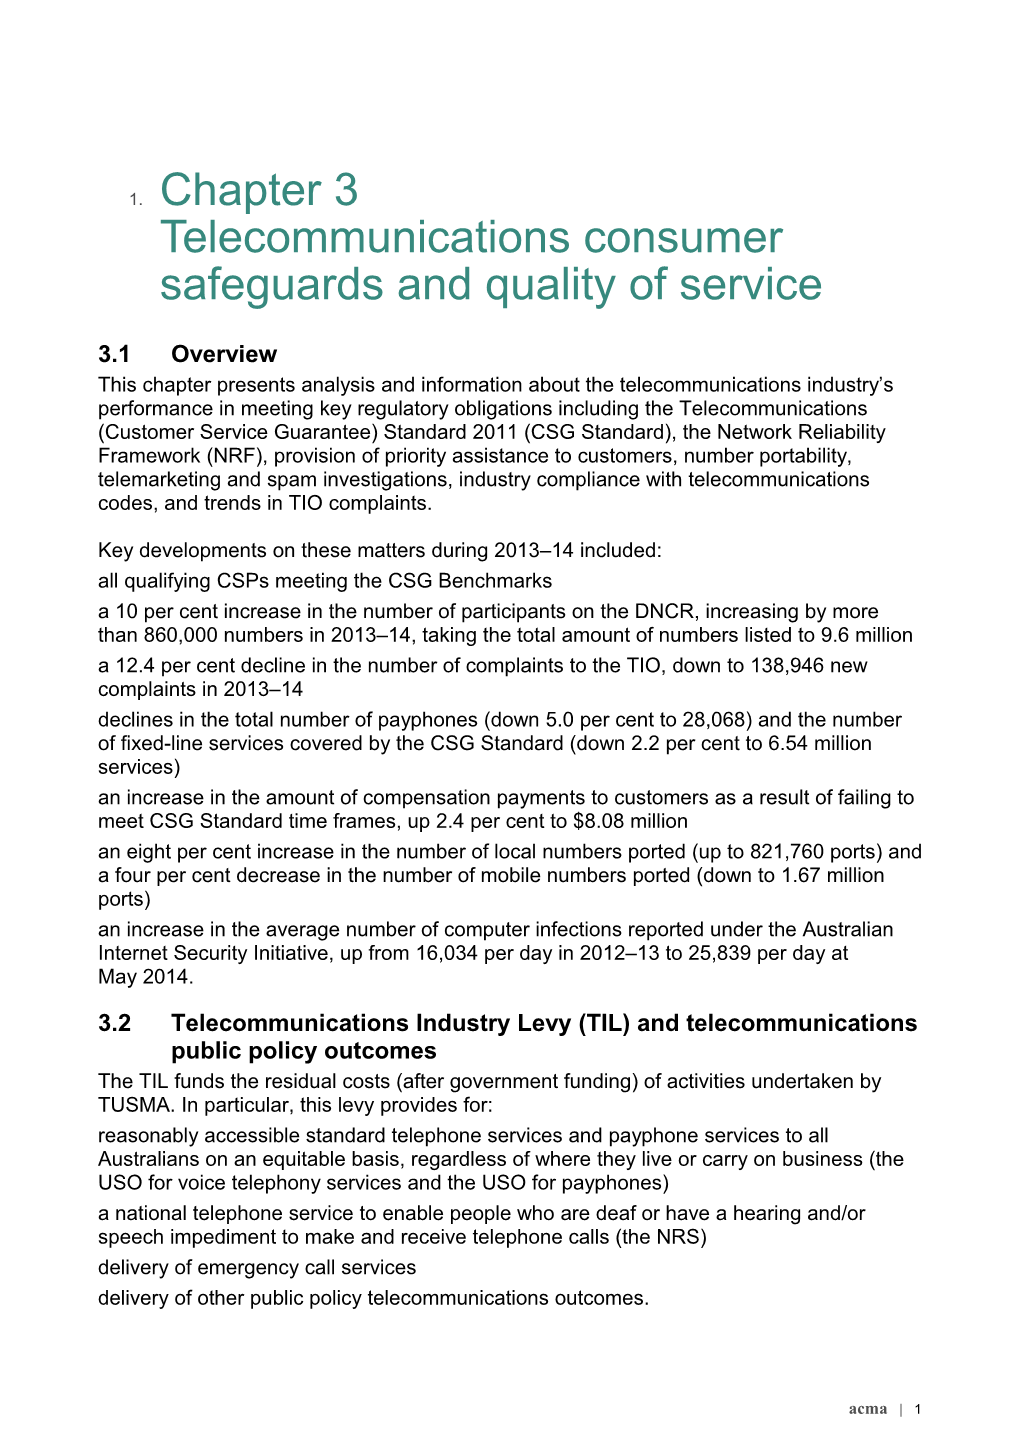 Chapter 3Telecommunications Consumer Safeguards and Quality of Service